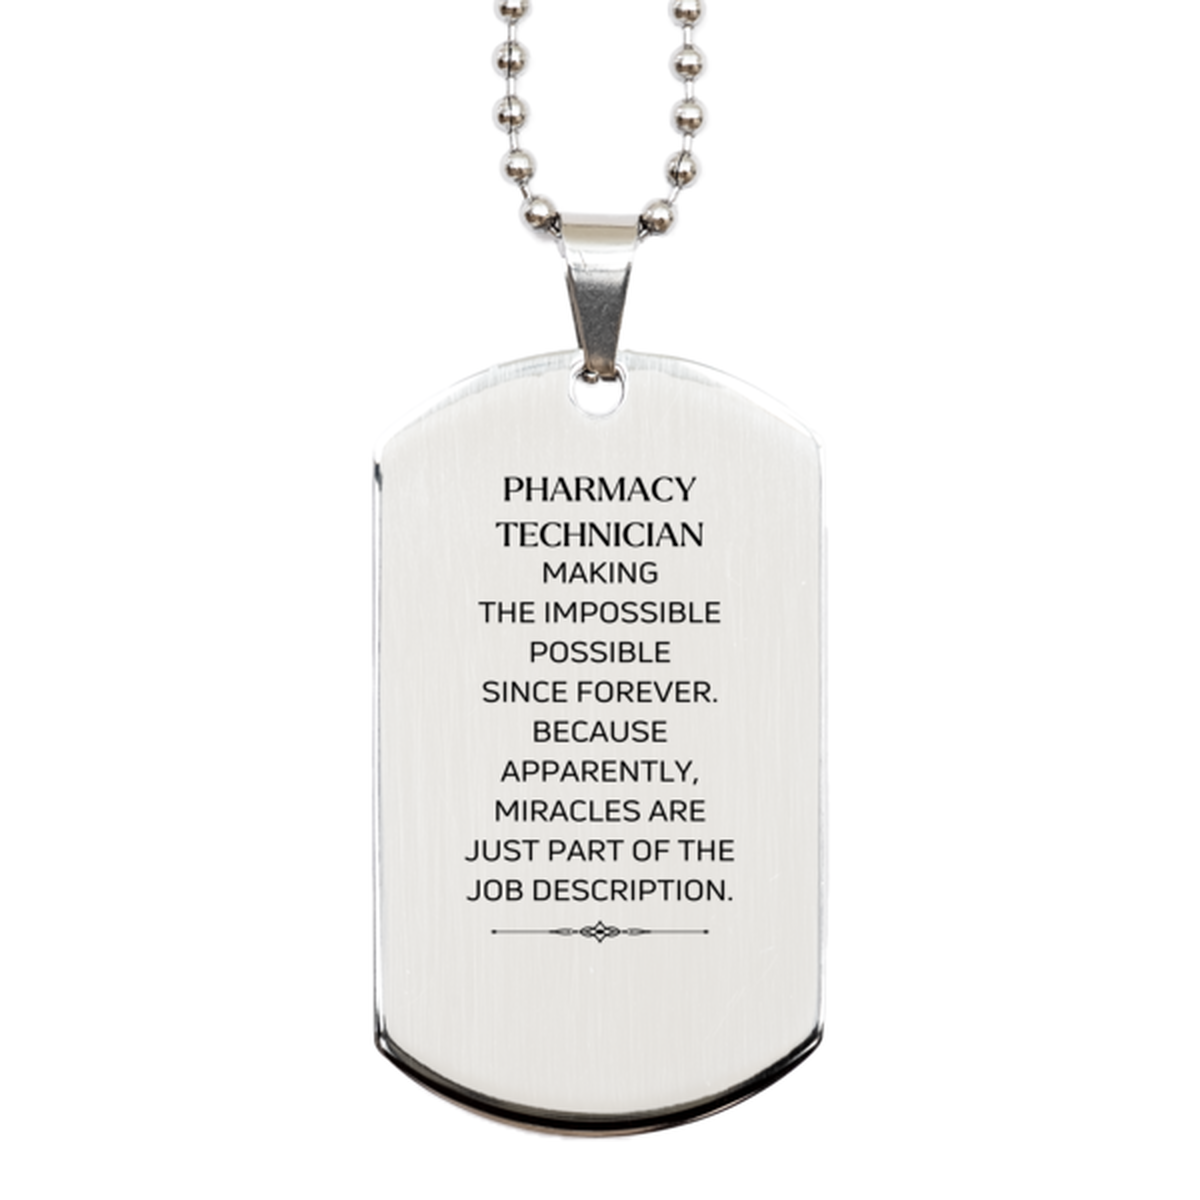 Funny Pharmacy Technician Gifts, Miracles are just part of the job description, Inspirational Birthday Silver Dog Tag For Pharmacy Technician, Men, Women, Coworkers, Friends, Boss